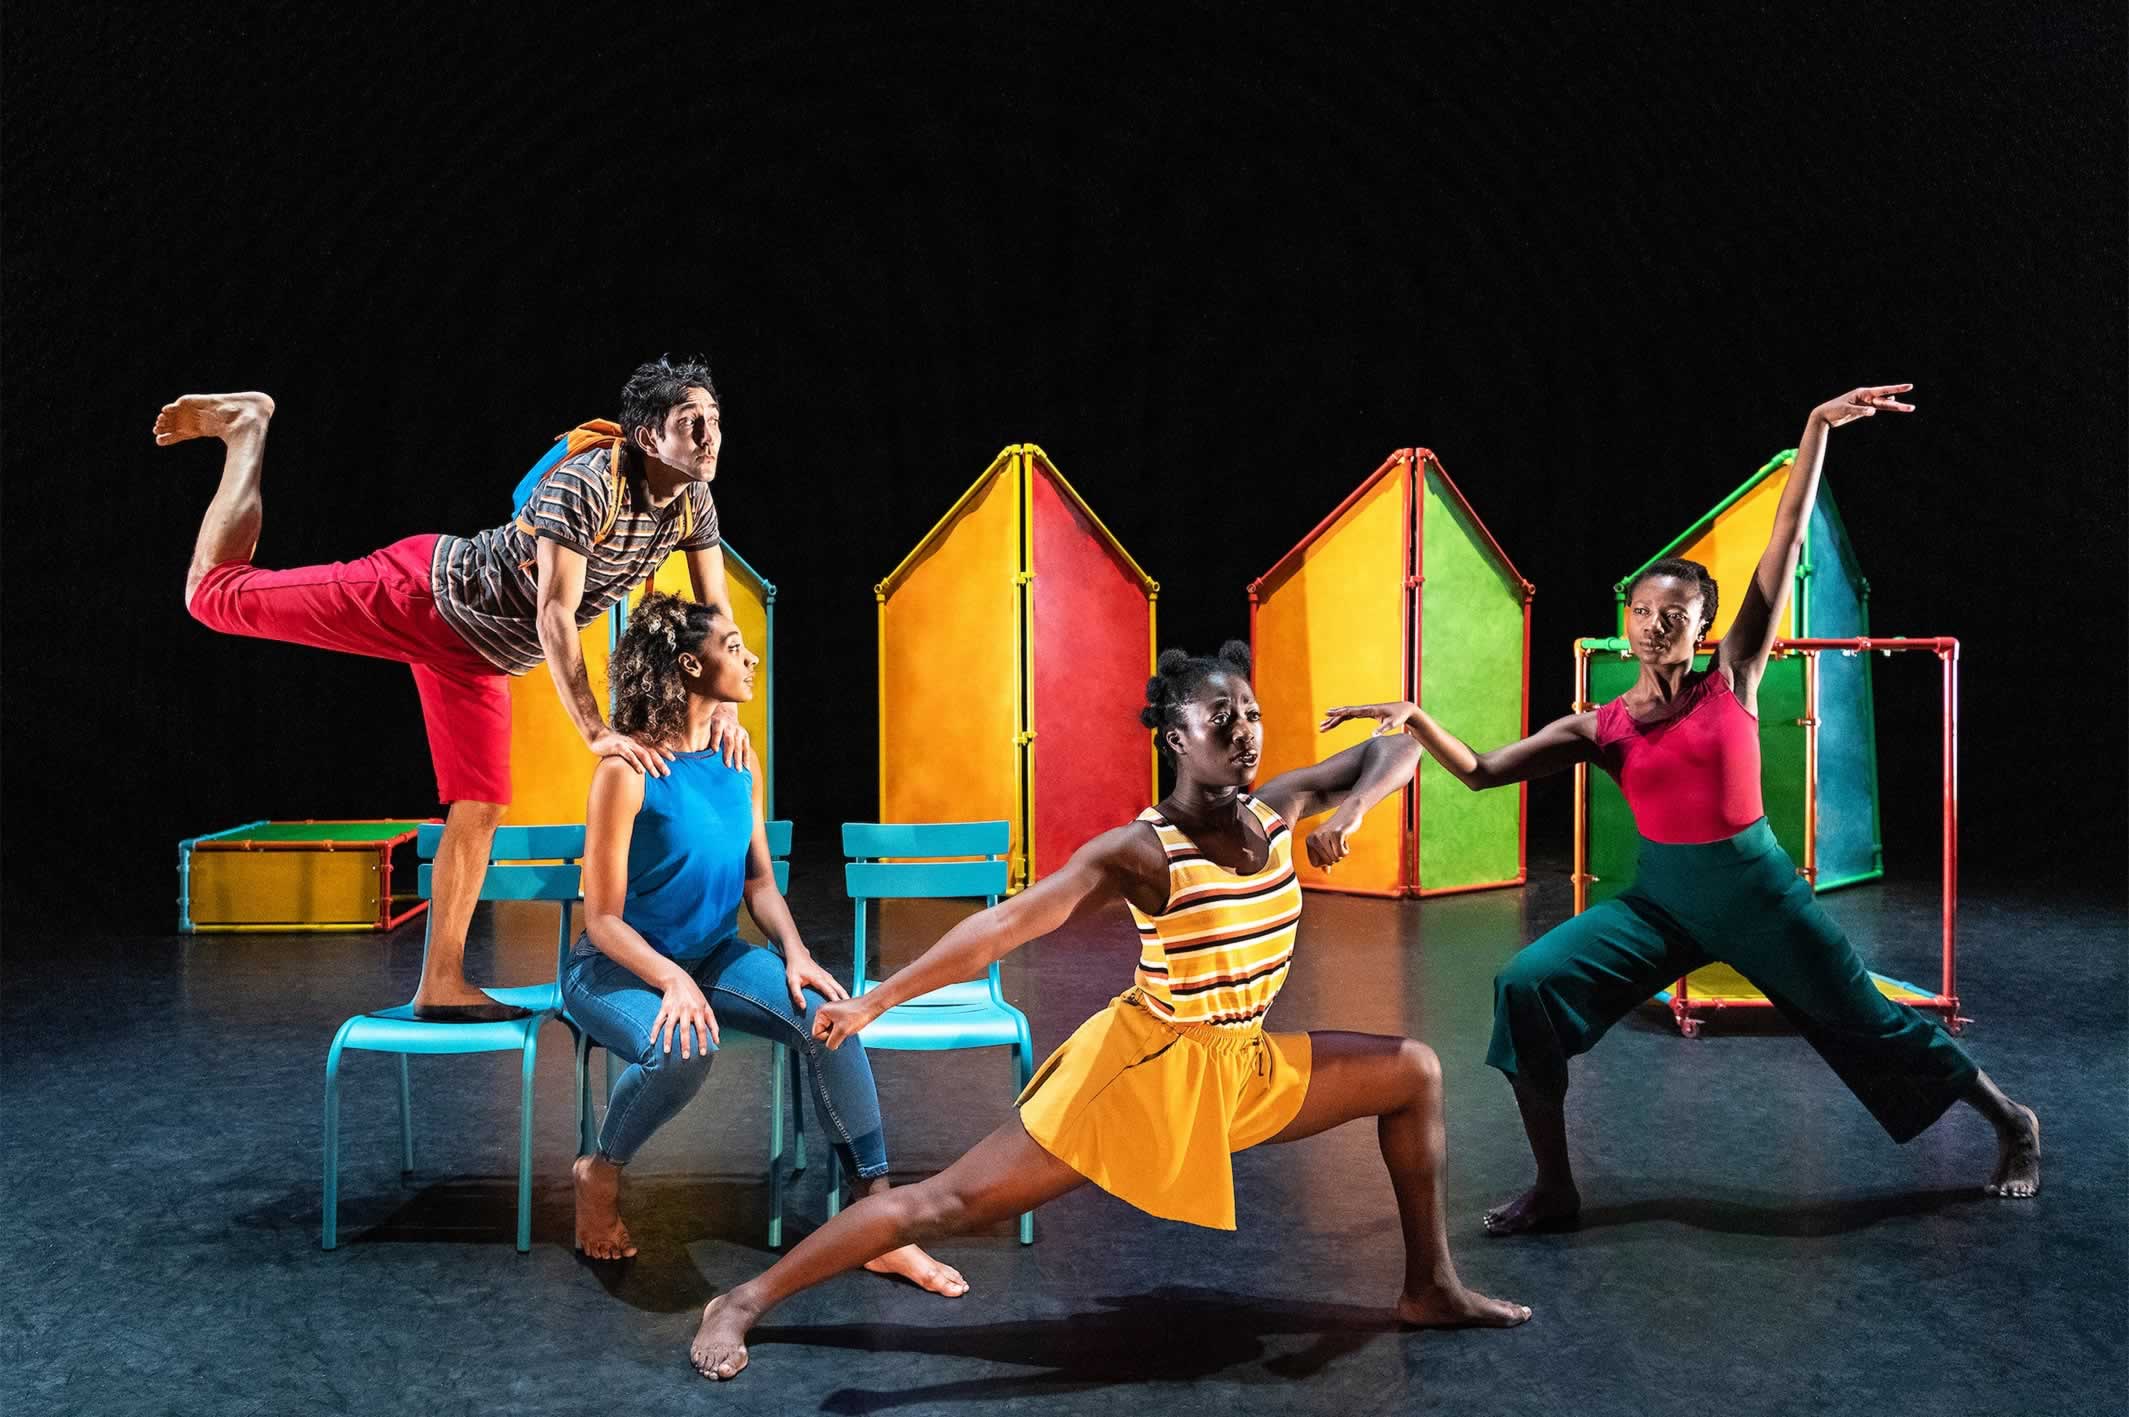 Four performers group together on set which combines different pastel colours: yellow, red, orange, light green, light blue, dark green. It looks a little bit like a kids’ playground.